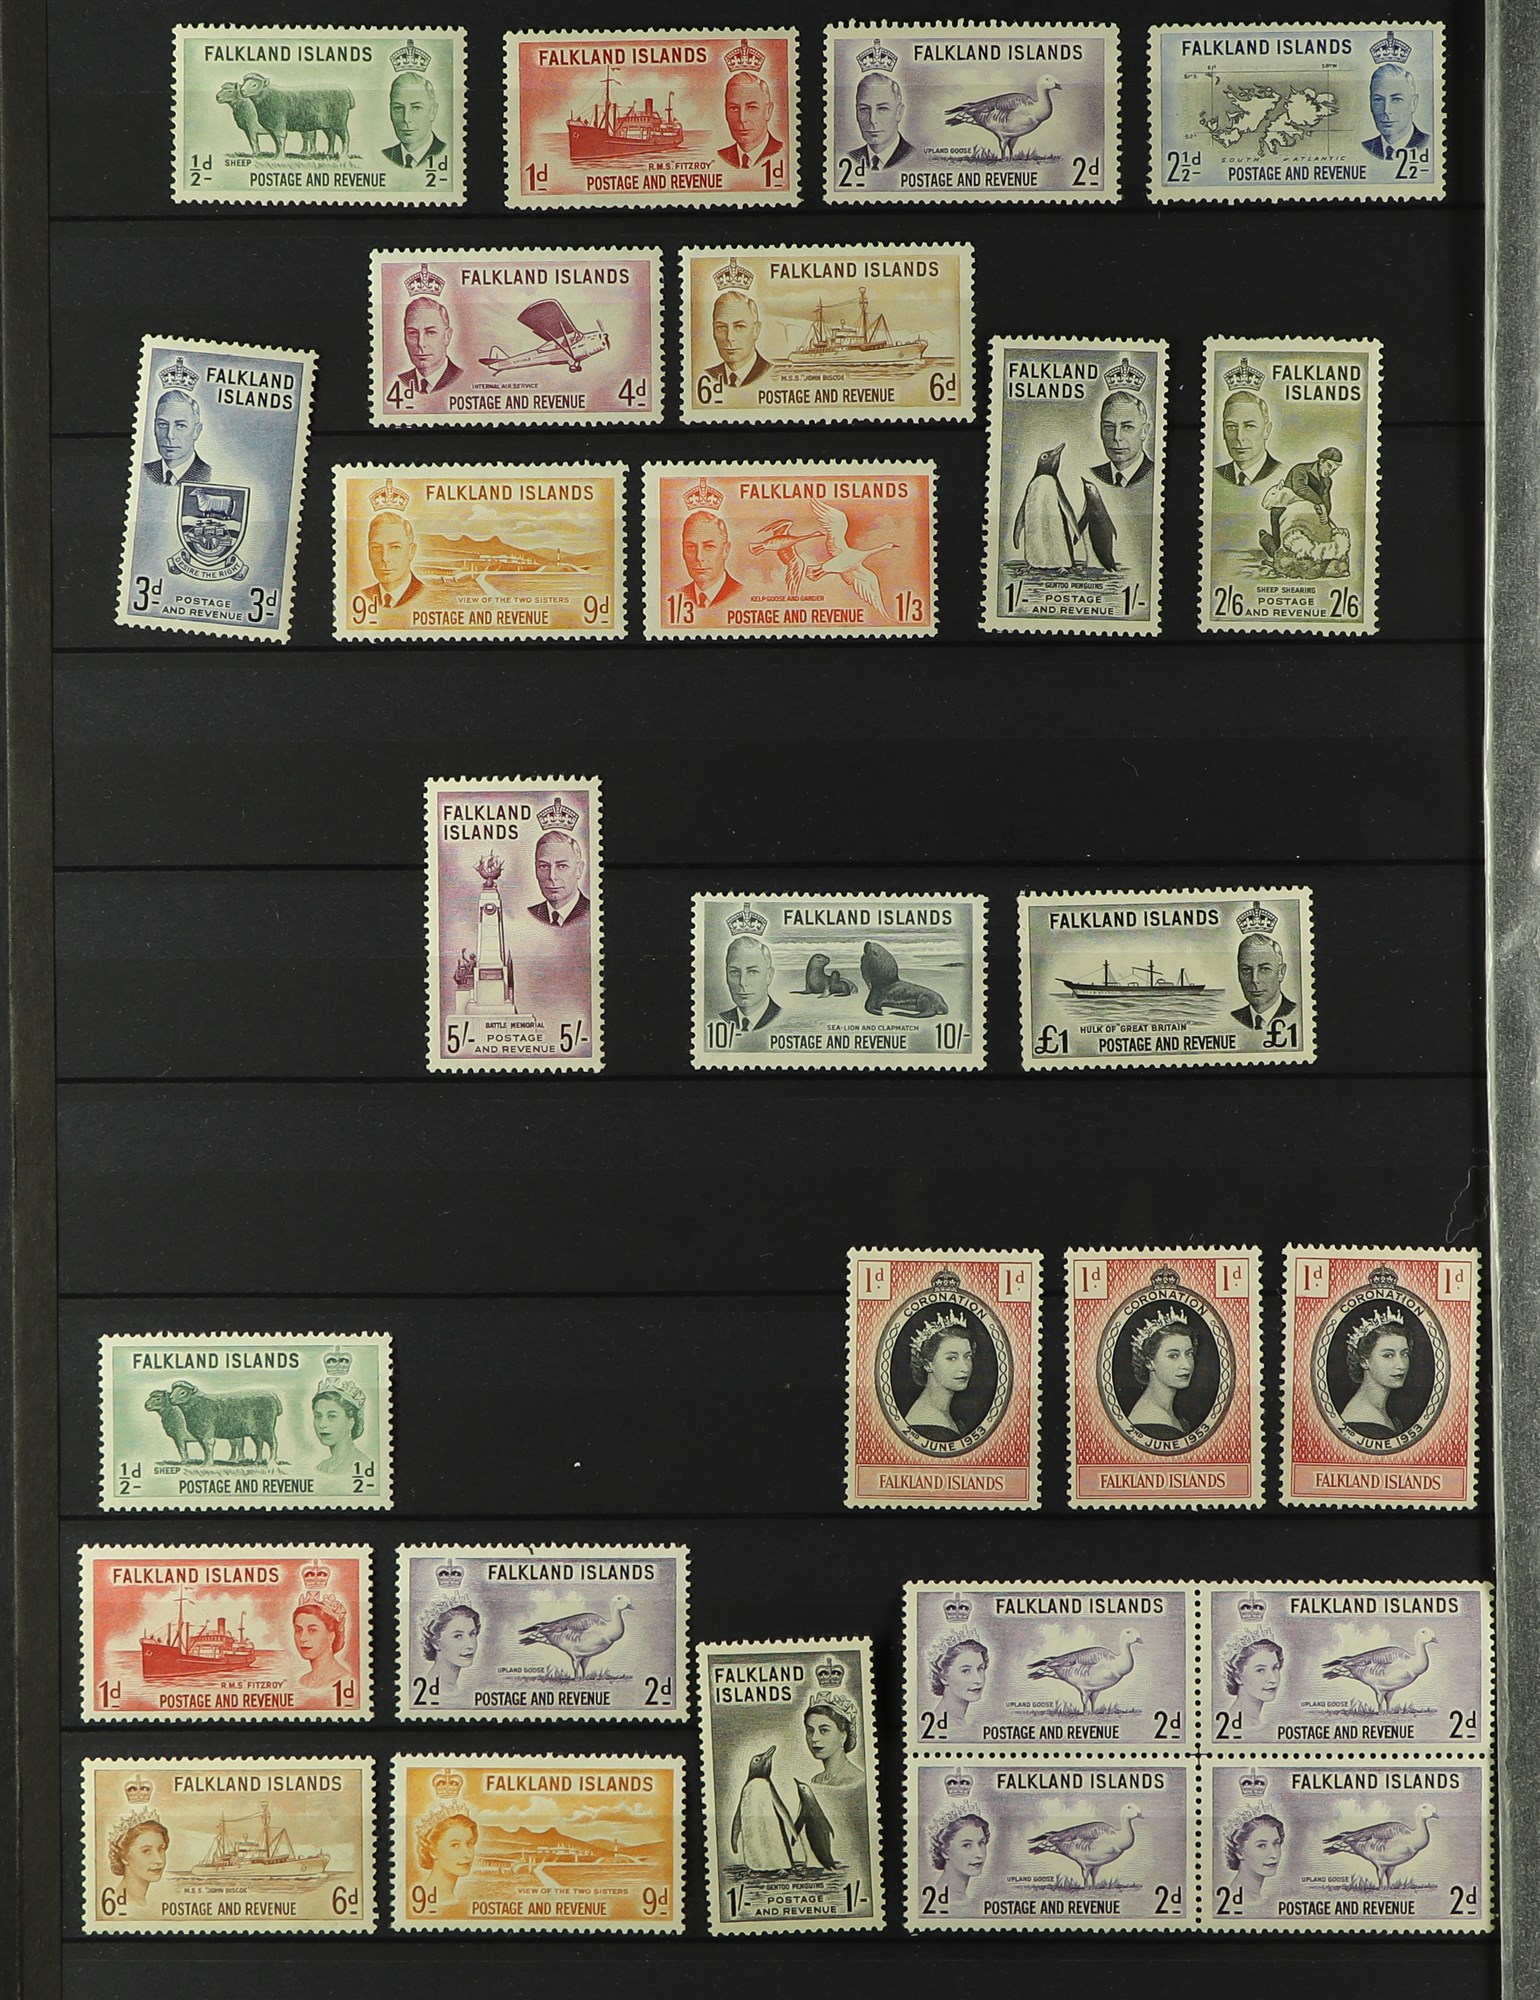 FALKLAND IS. 1891 - 1990's MINT / MOSTLY NEVER HINGED MINT ASSORTMENT of stamps on protective pages, - Image 3 of 11